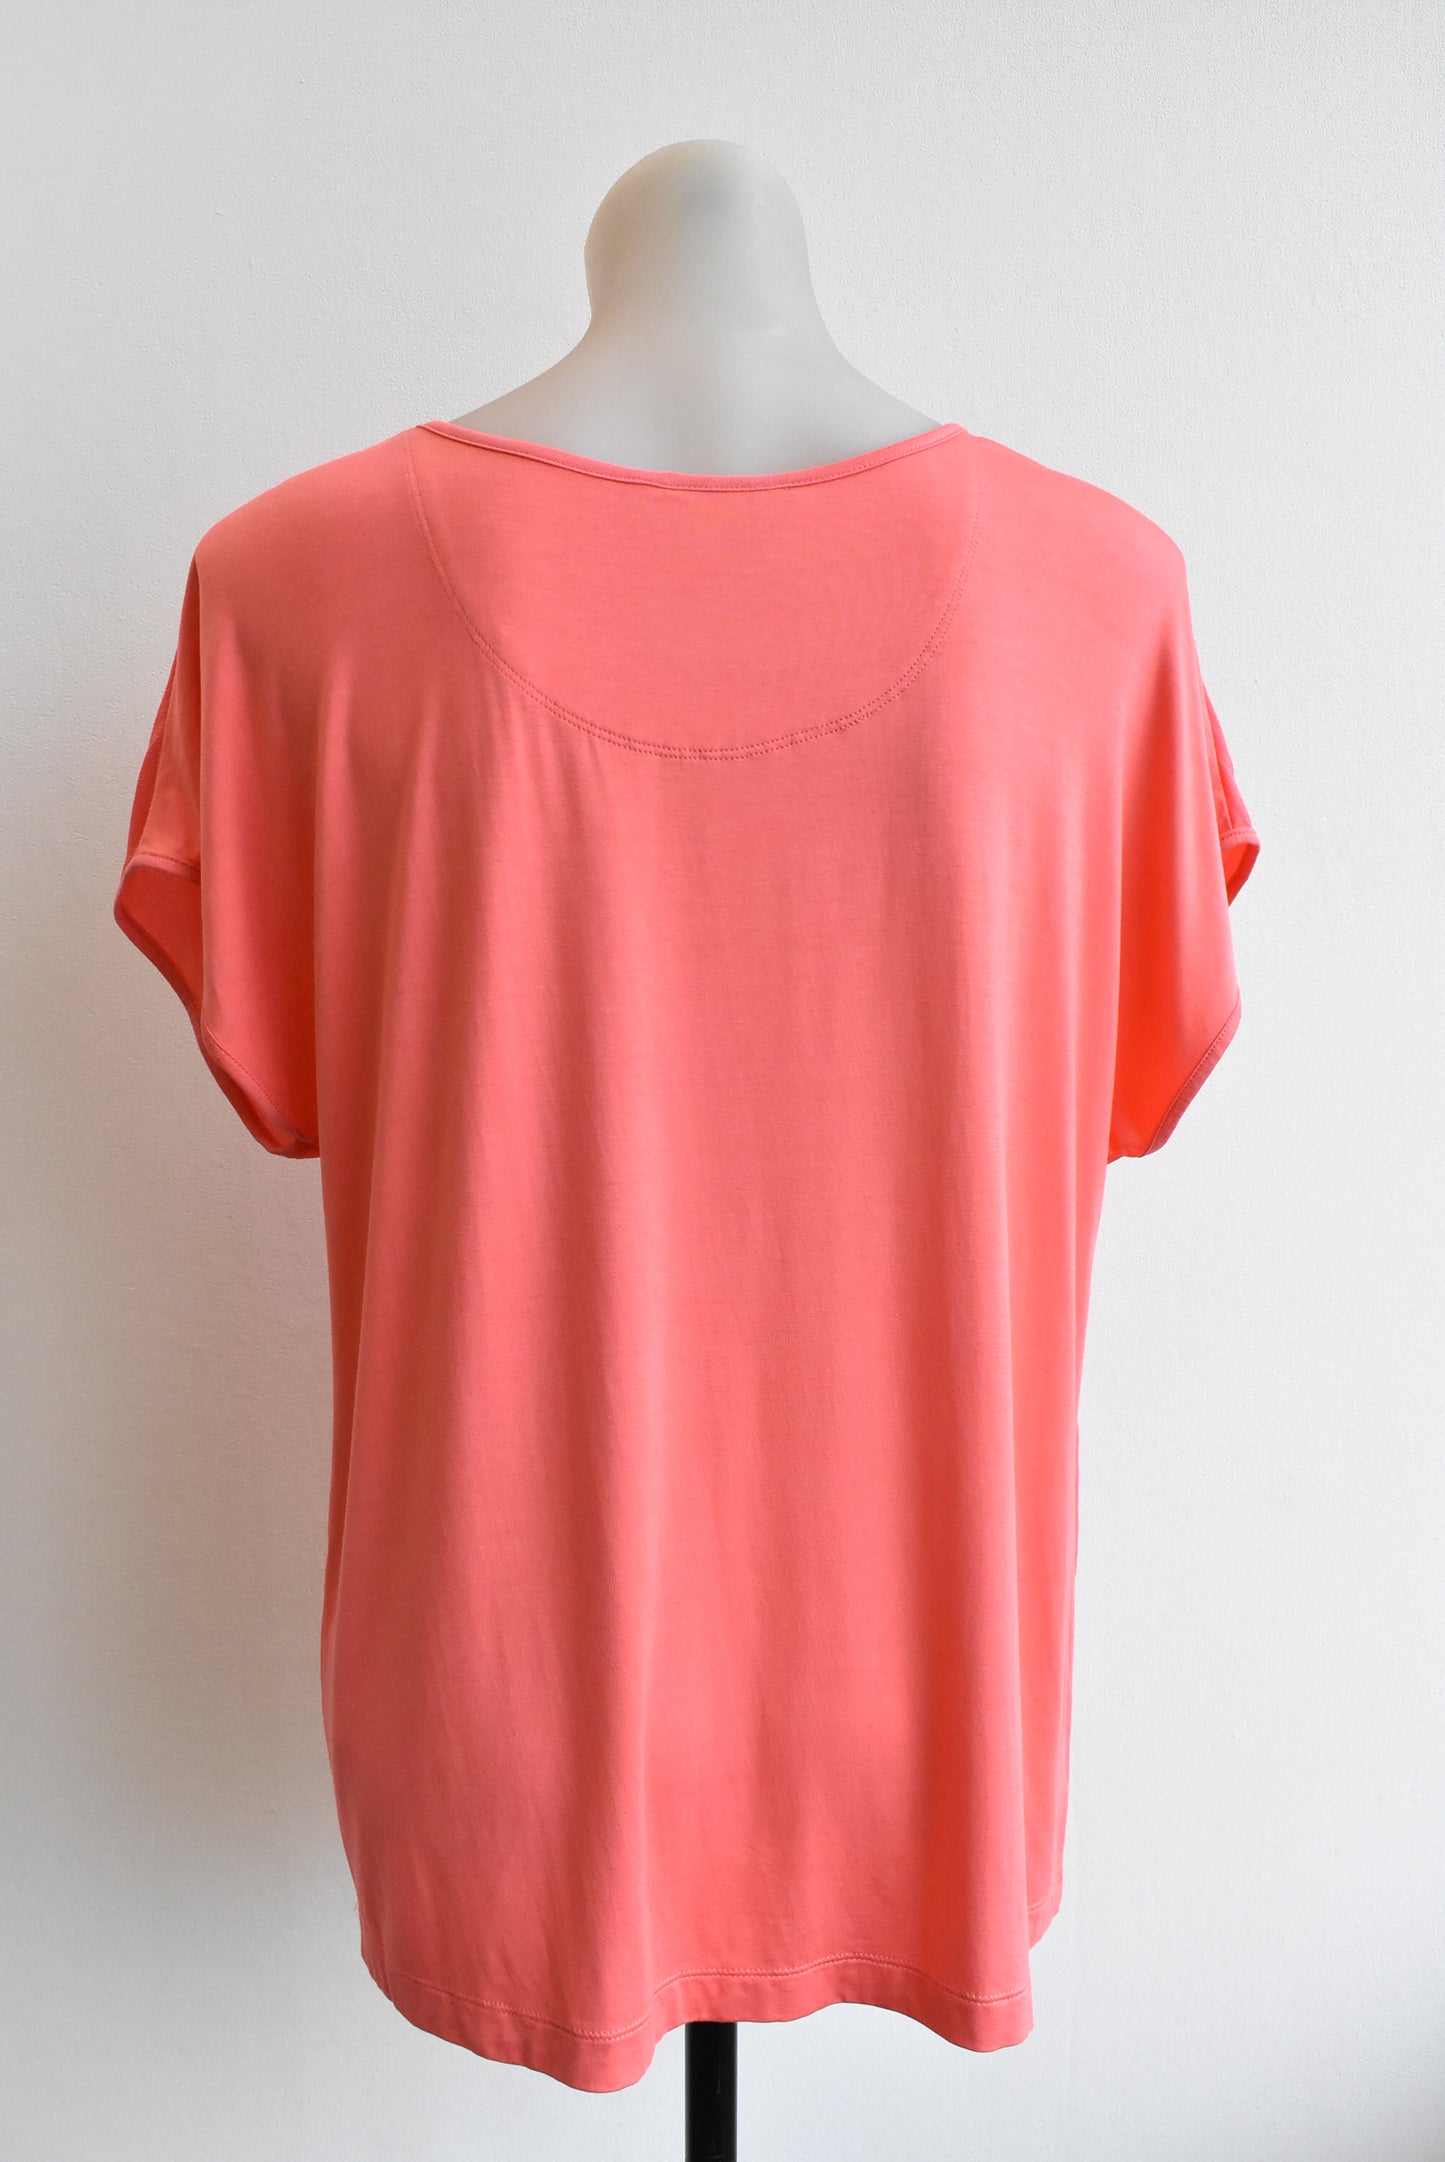 Jigsaw coral pink top, size 12